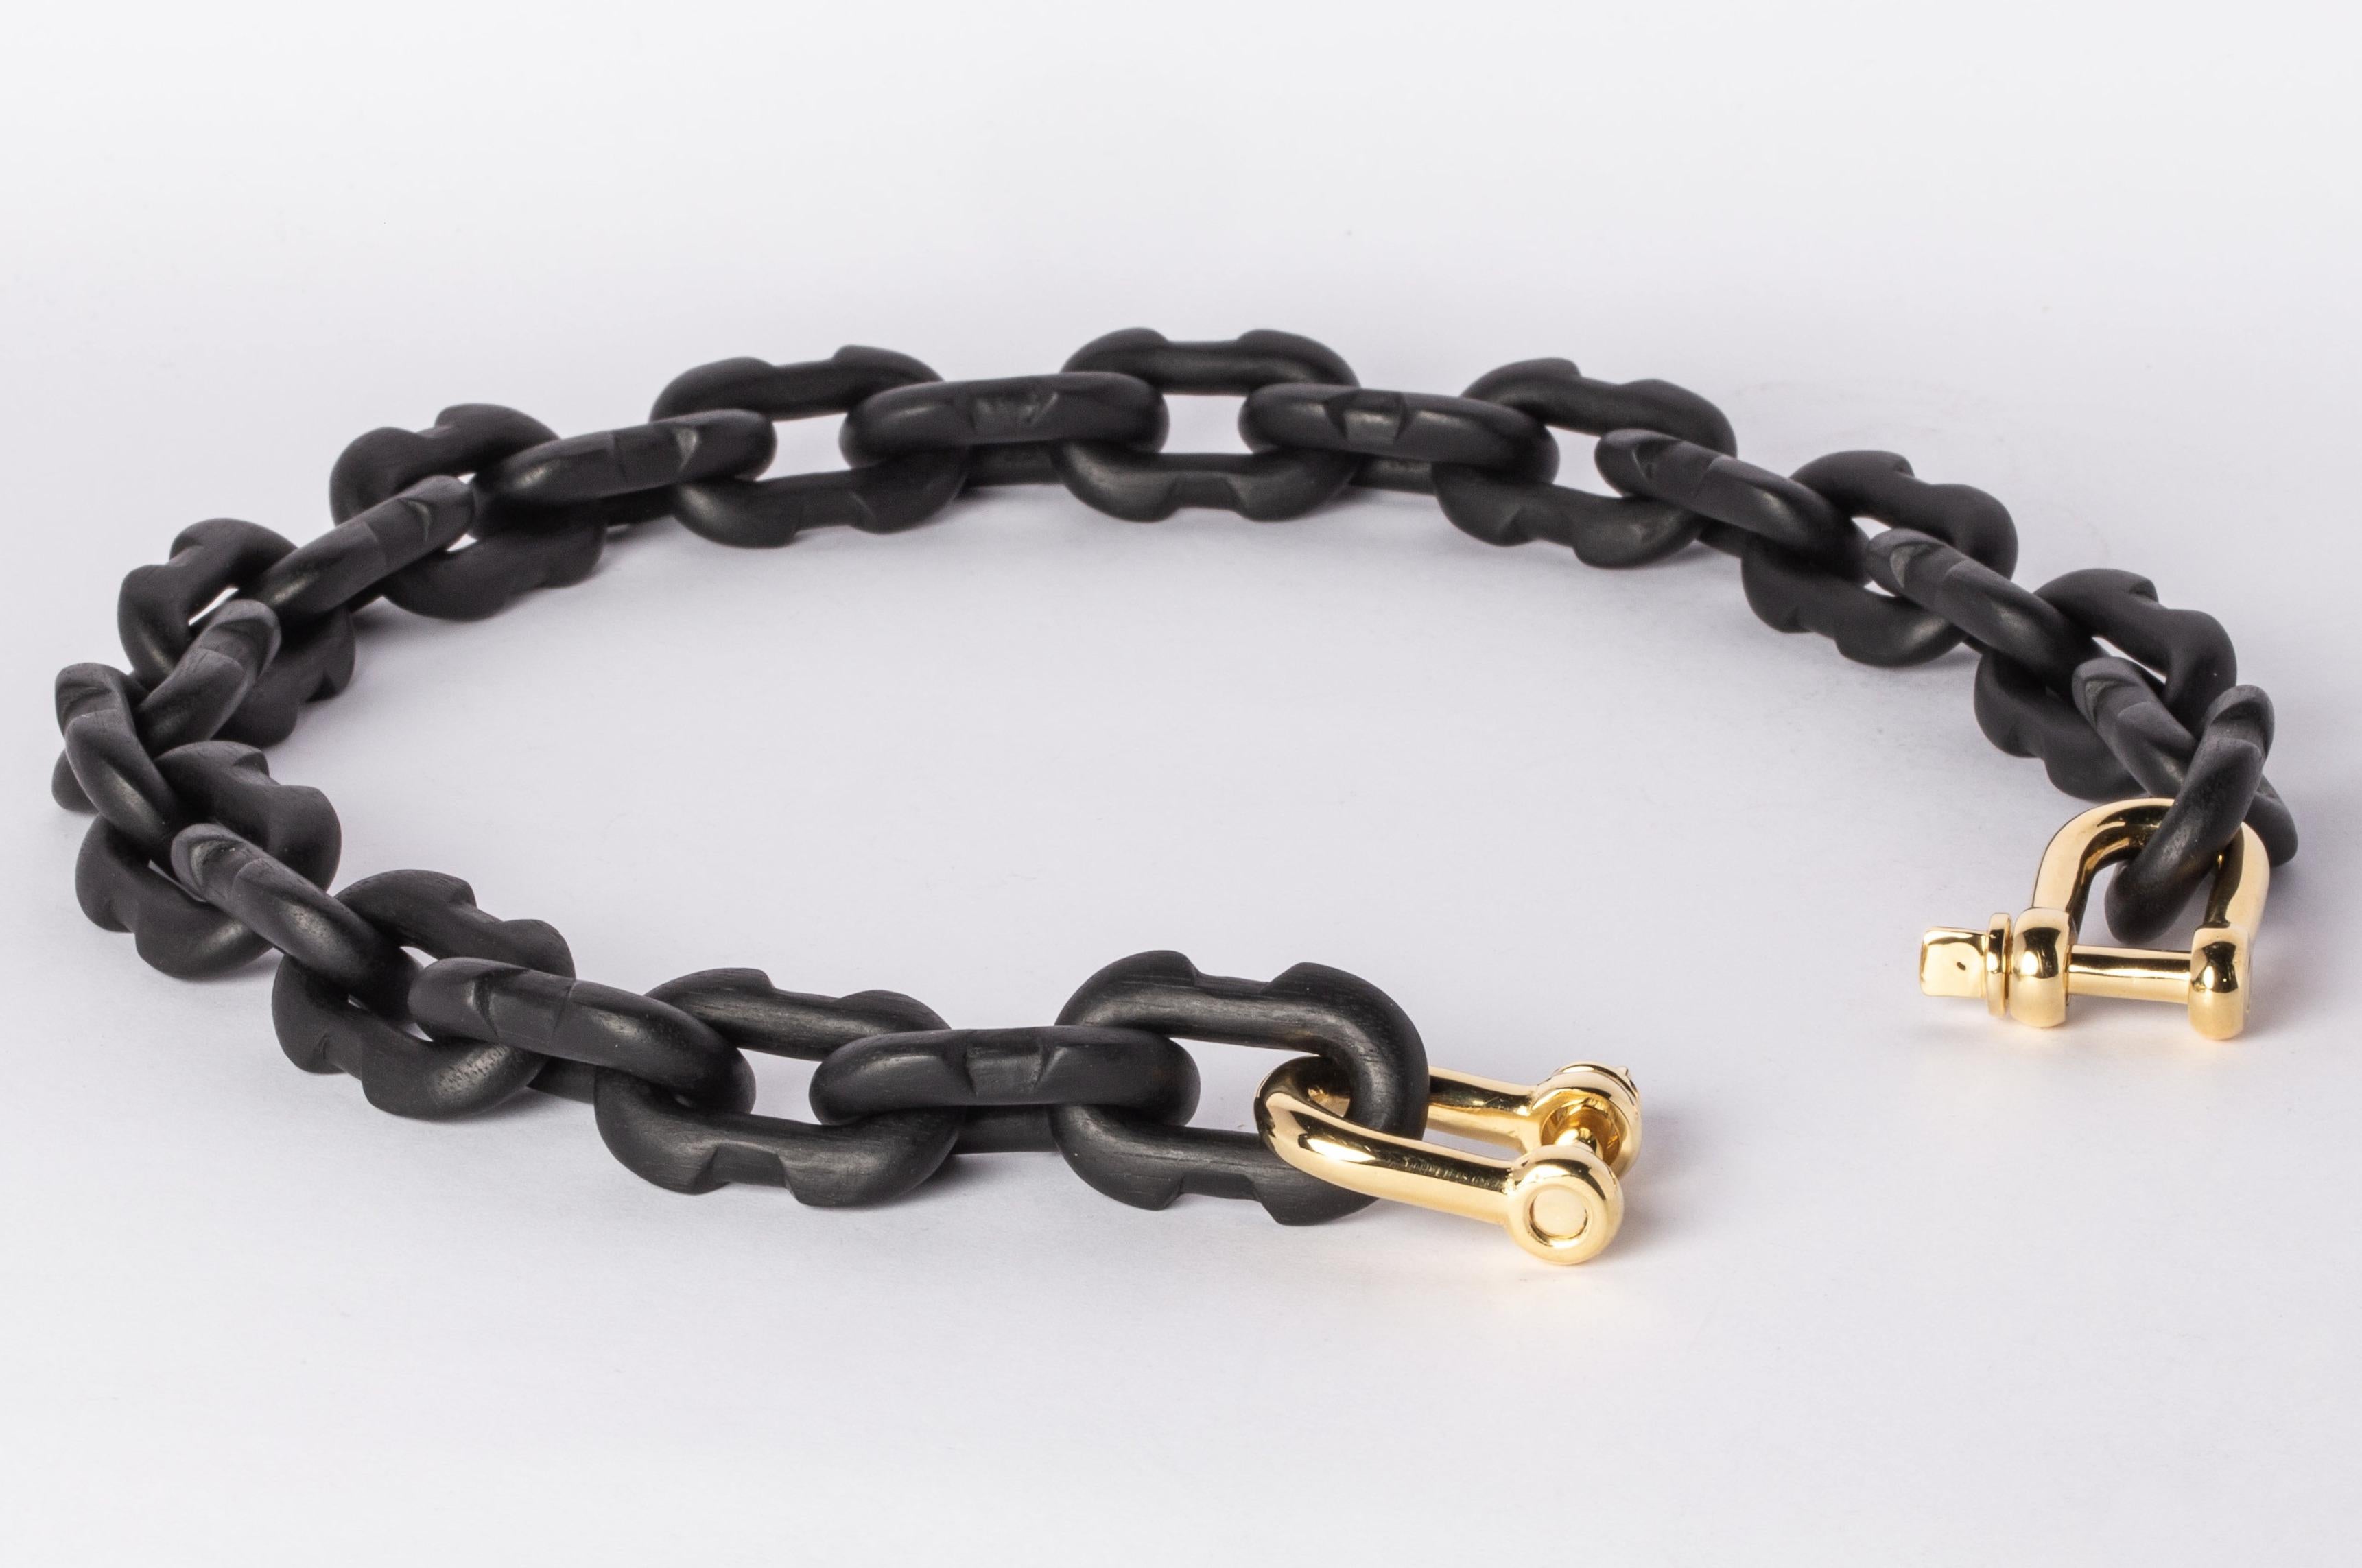 Chain necklace made of brass and wood. All organic chain is carved by hand. In the case of the chains made of wood, they are absolutely seamless; carved from a single long slab of wood (see link). 
The Charm System is an interrelated group of